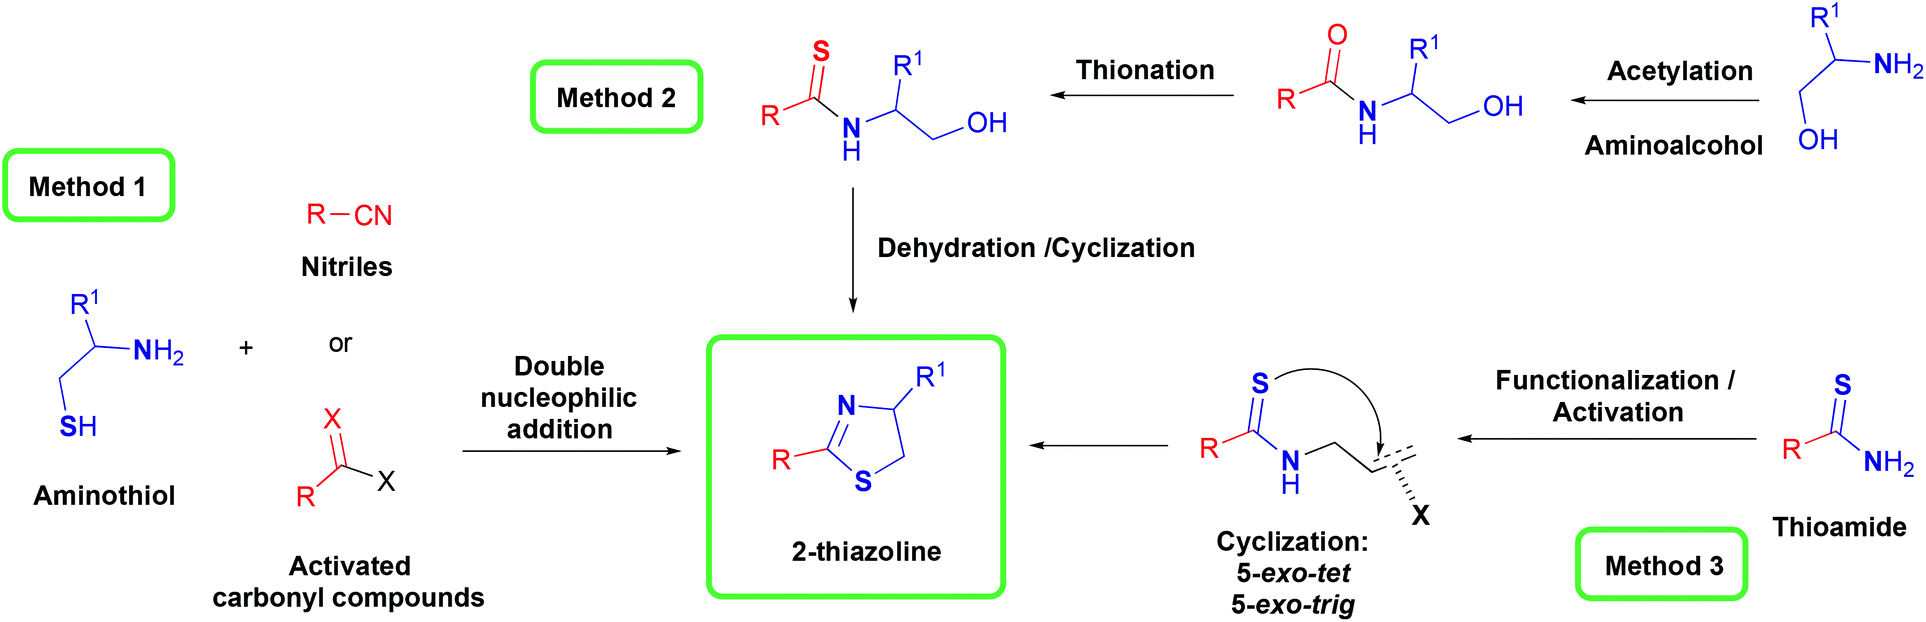 2 Thiazolines An Update On Synthetic Methods And Catalysis Organic Biomolecular Chemistry Rsc Publishing Doi 10 1039 D1obd